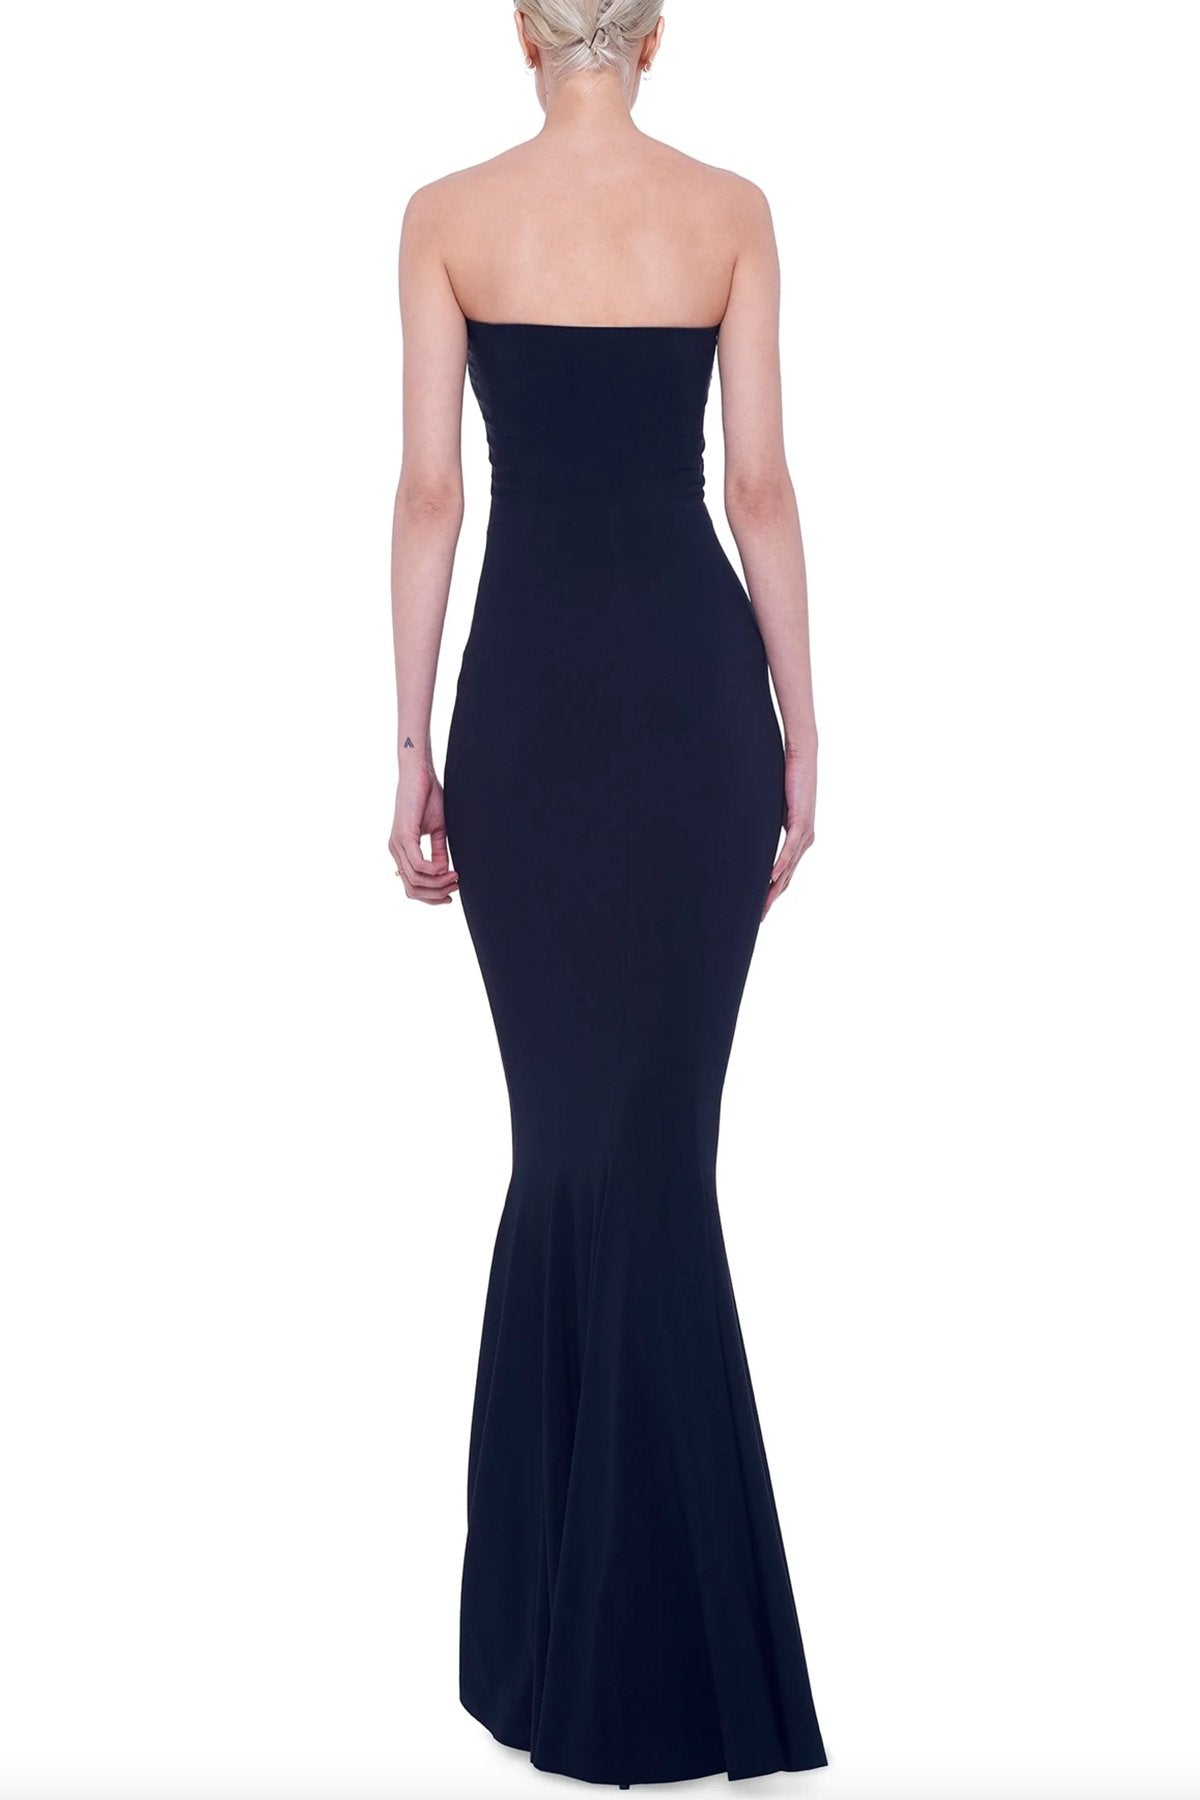 Strapless Fishtail Gown in Black - shop-olivia.com